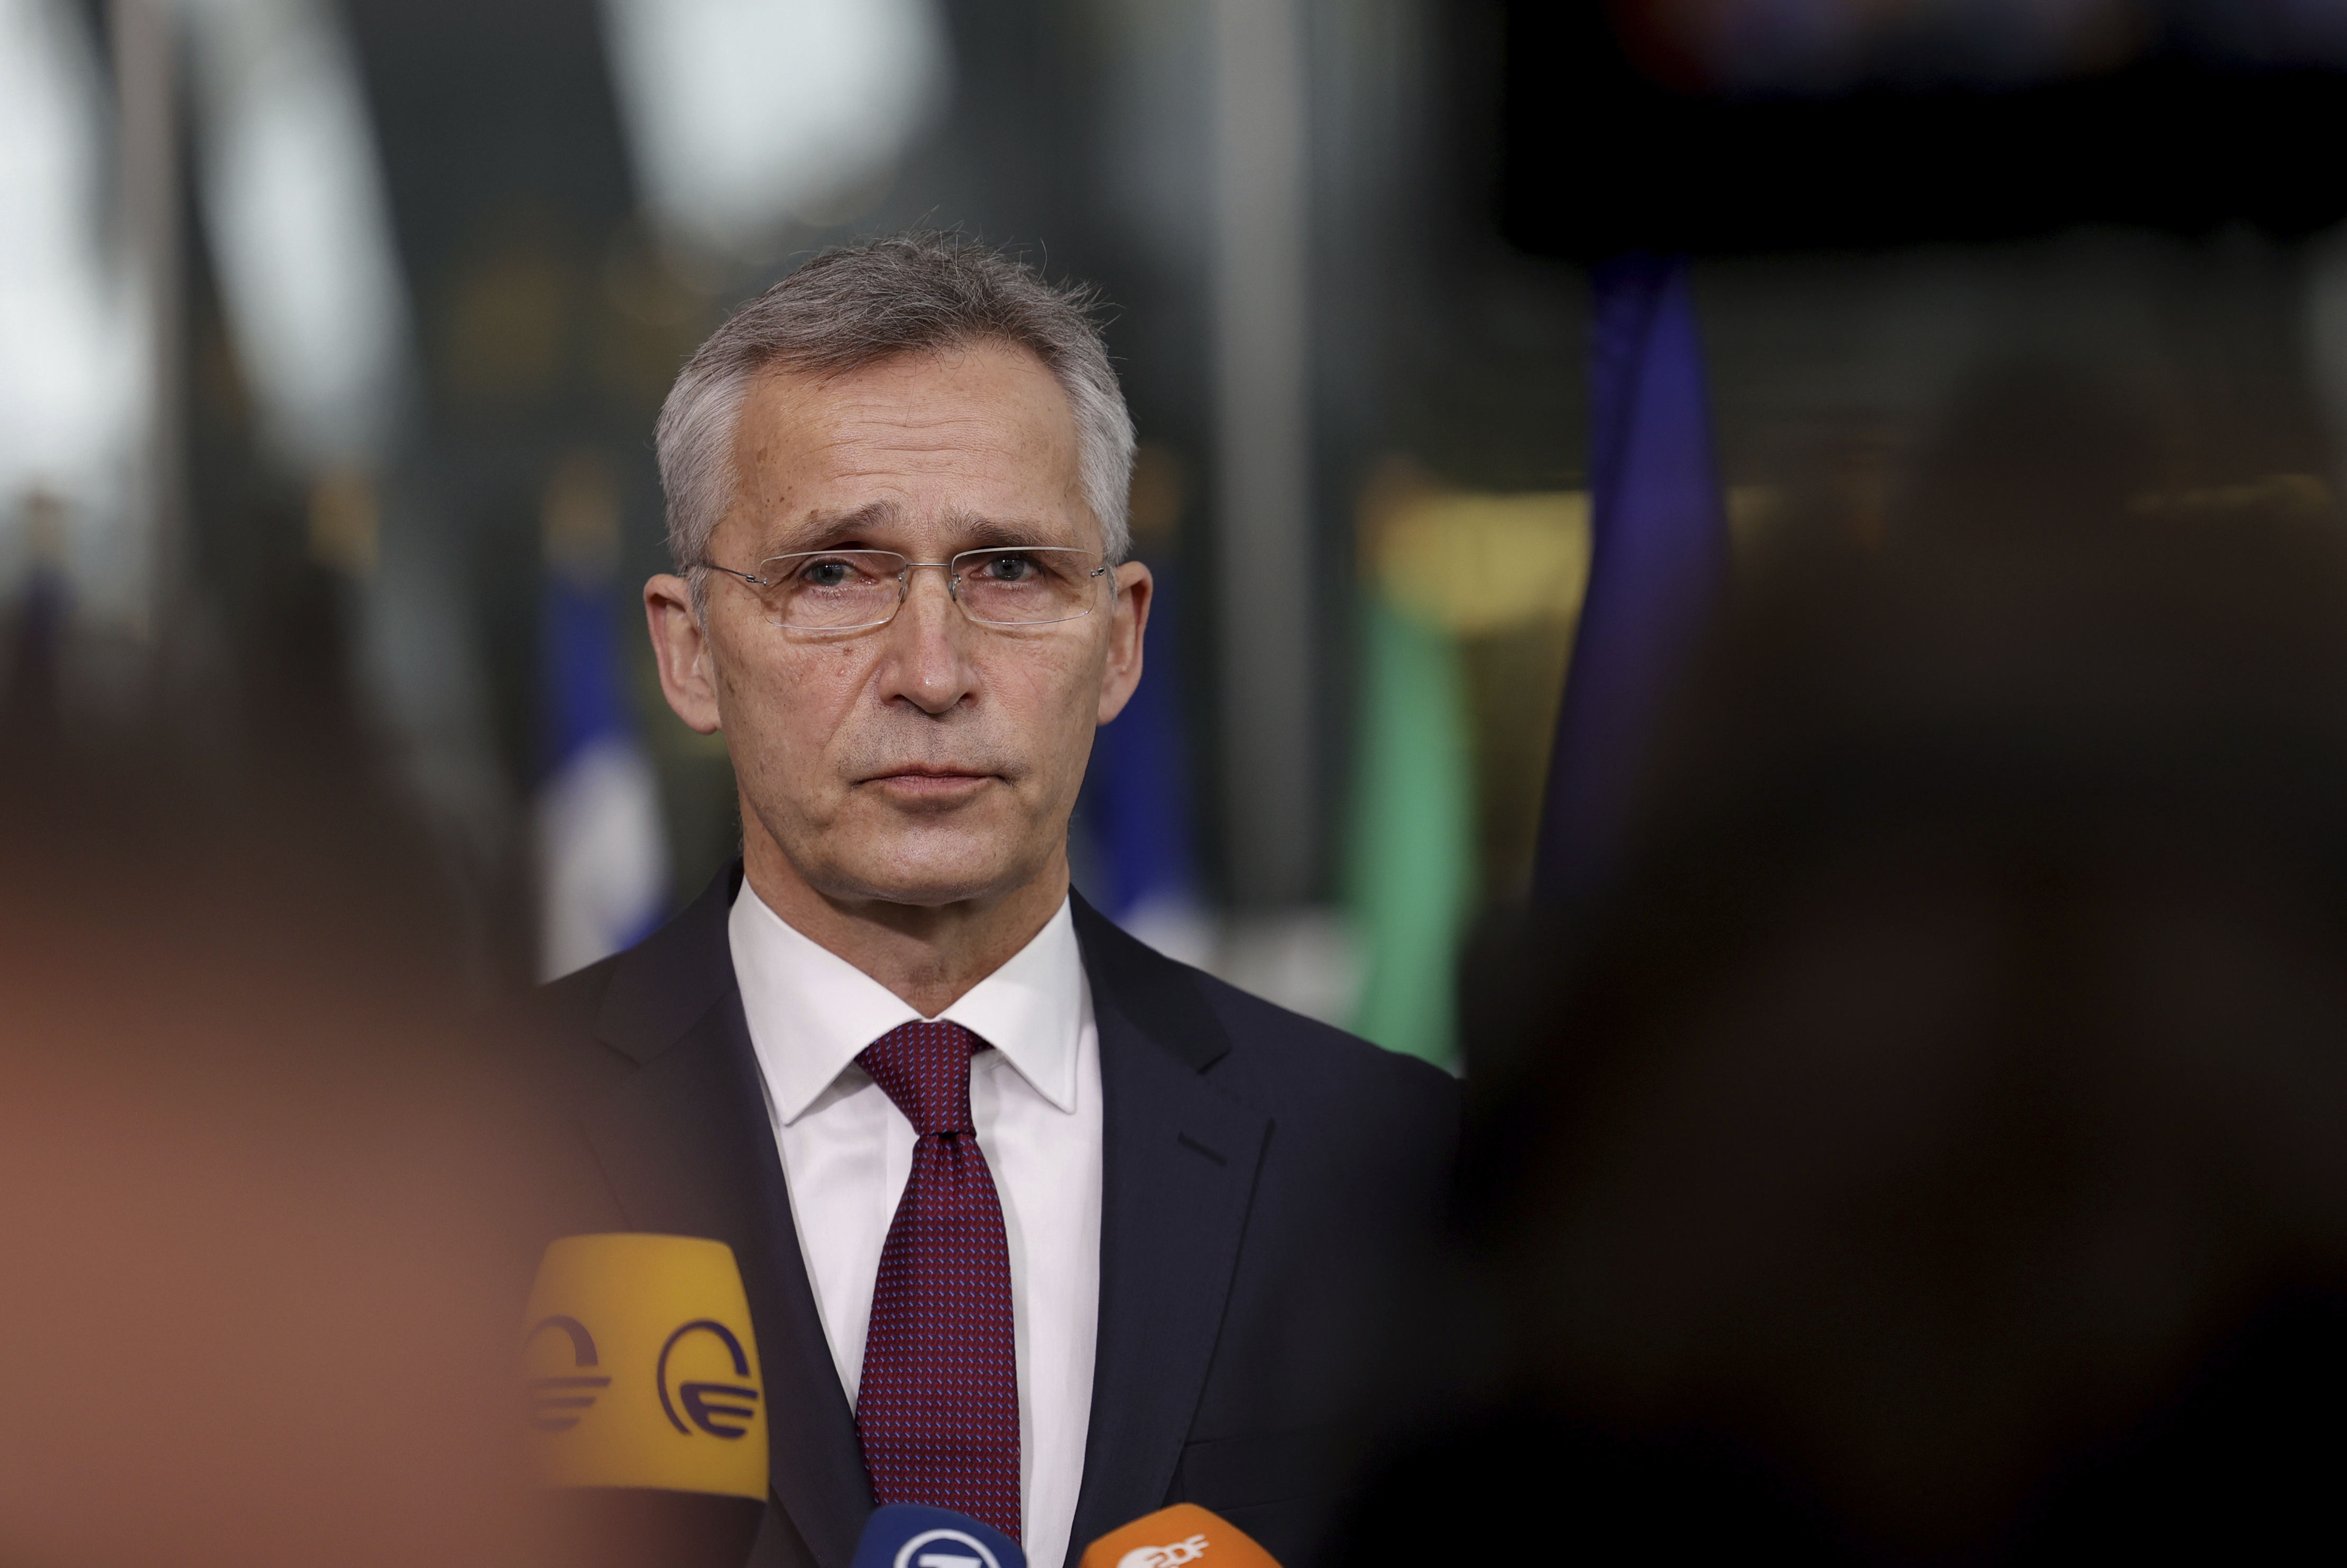 NATO Secretary General Jens Stoltenberg listens to a question from a journalist as he arrives for a meeting of NATO defense ministers at NATO headquarters in Brussels, Belgium, on February 16.